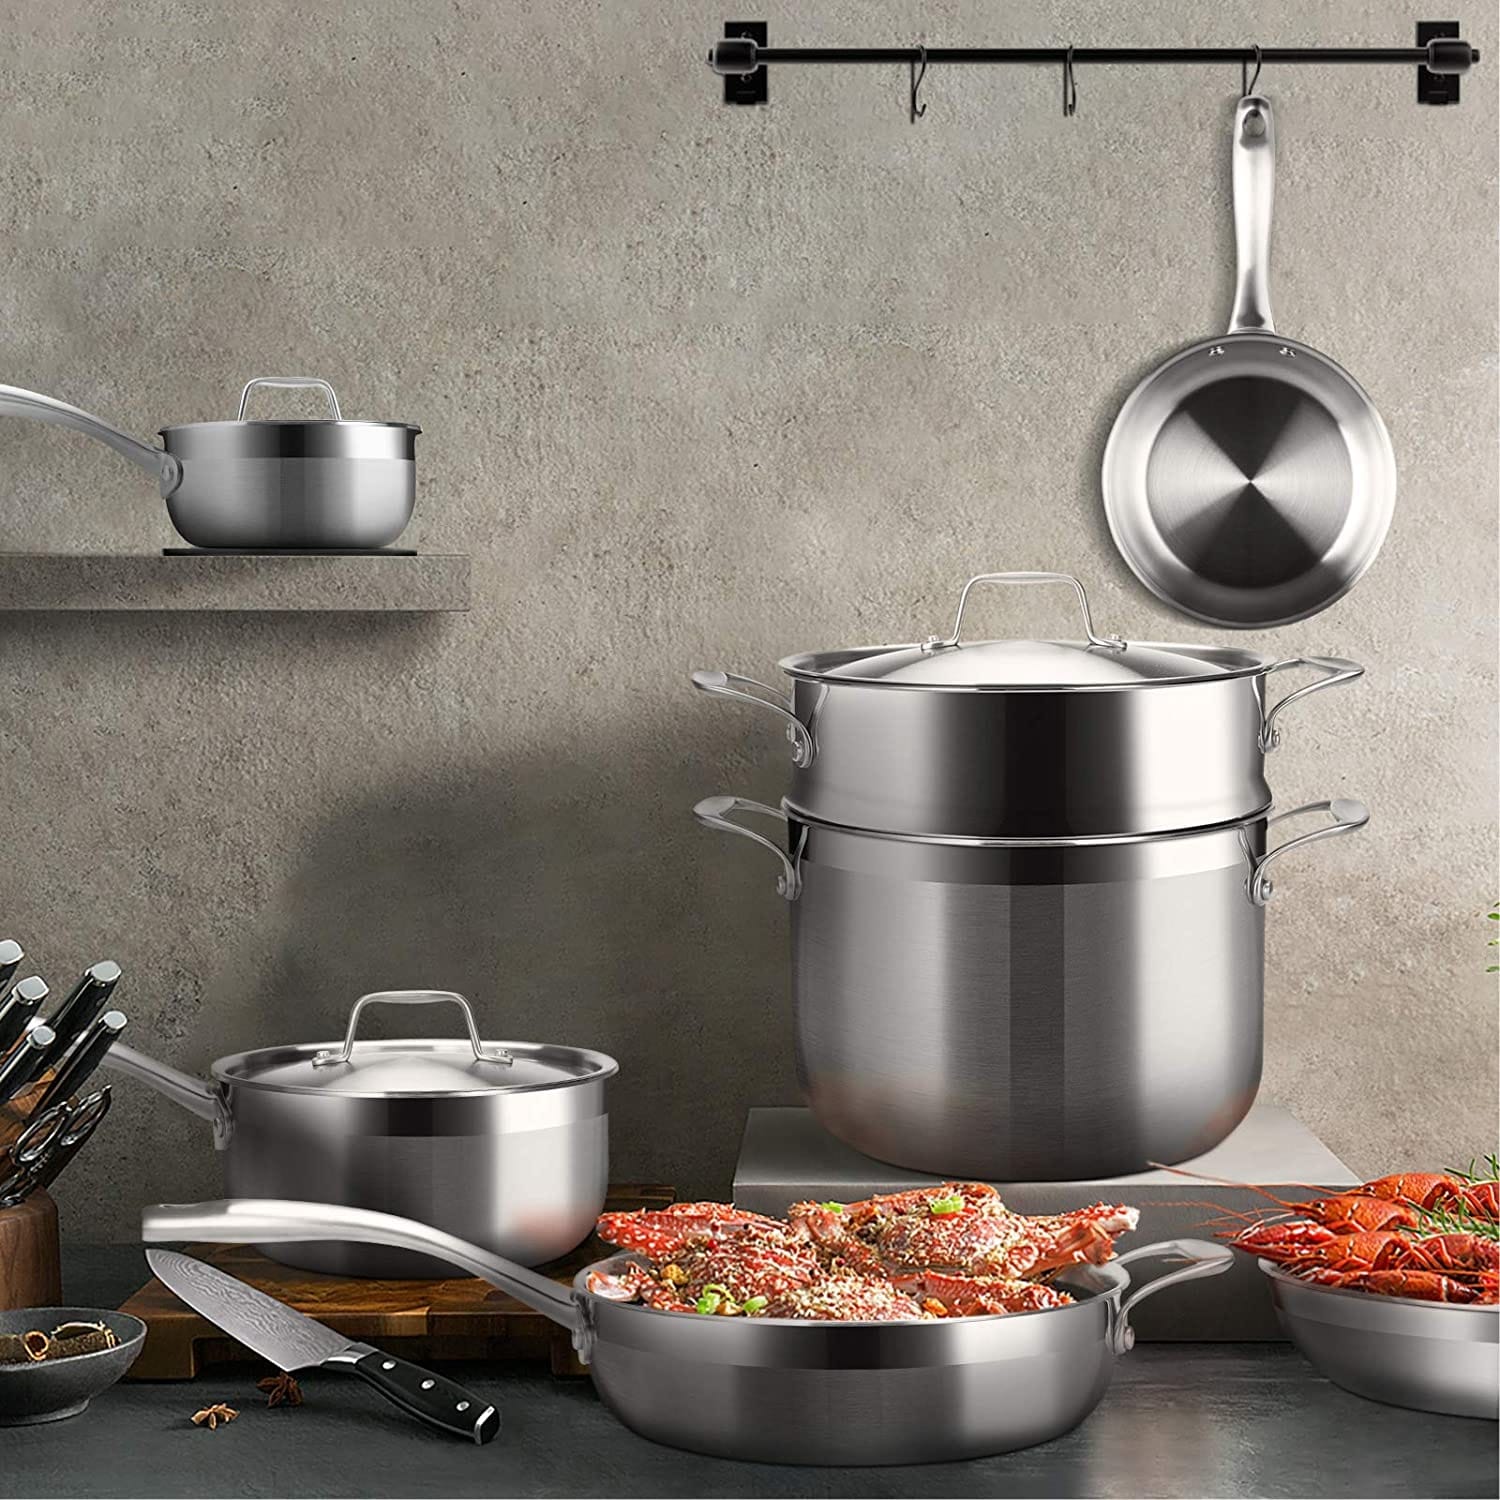 Duxtop Whole-Clad Tri-Ply Stainless Steel Induction Cookware Set, 14PC  Kitchen Pots and Pans Set - Bed Bath & Beyond - 37508866